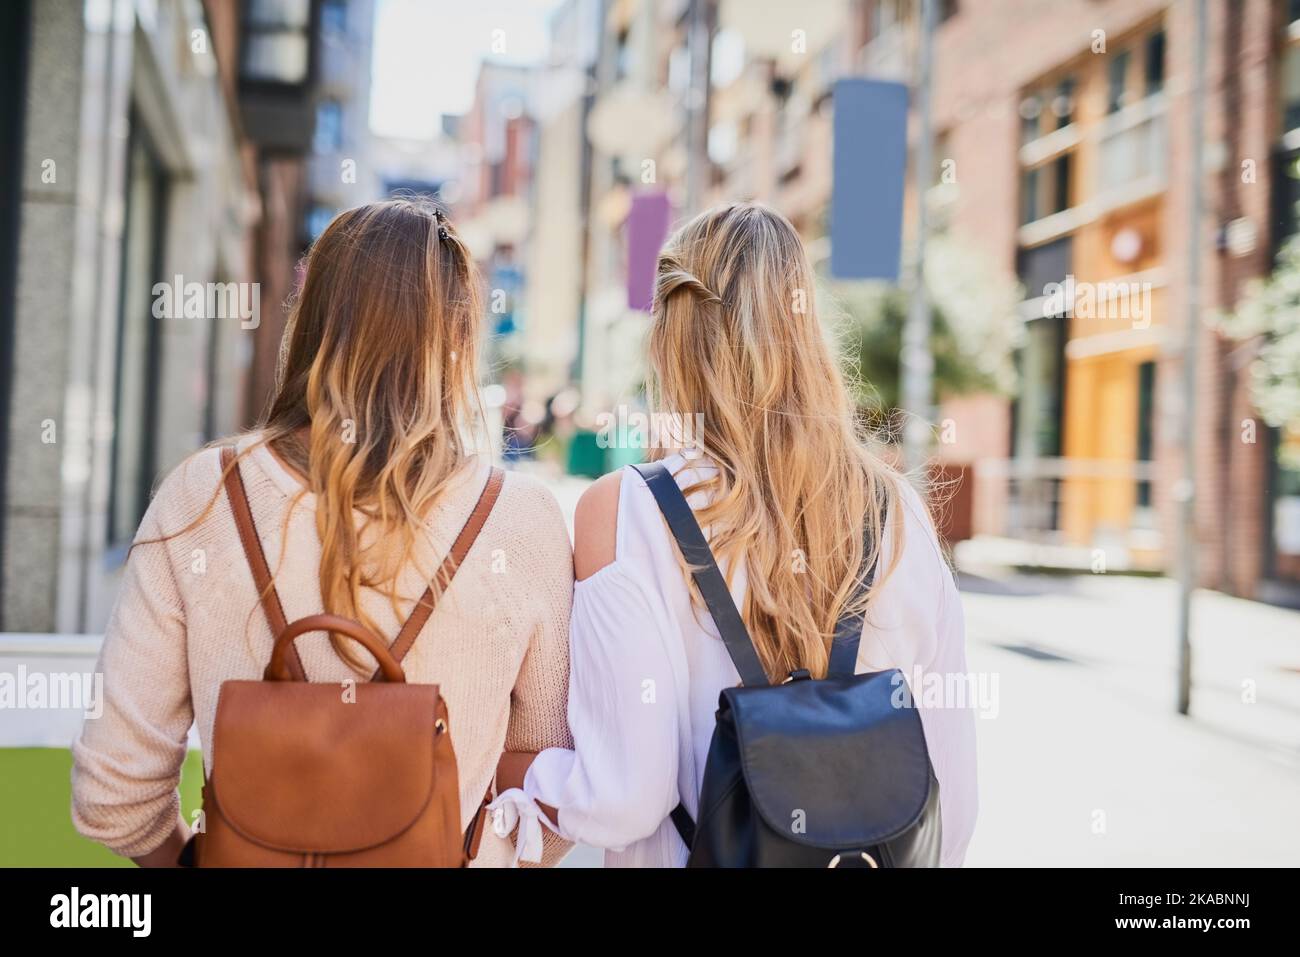 Seeing the world. Rearview shot of two unrecognizable young girlfriends exploring a foreign city. Stock Photo